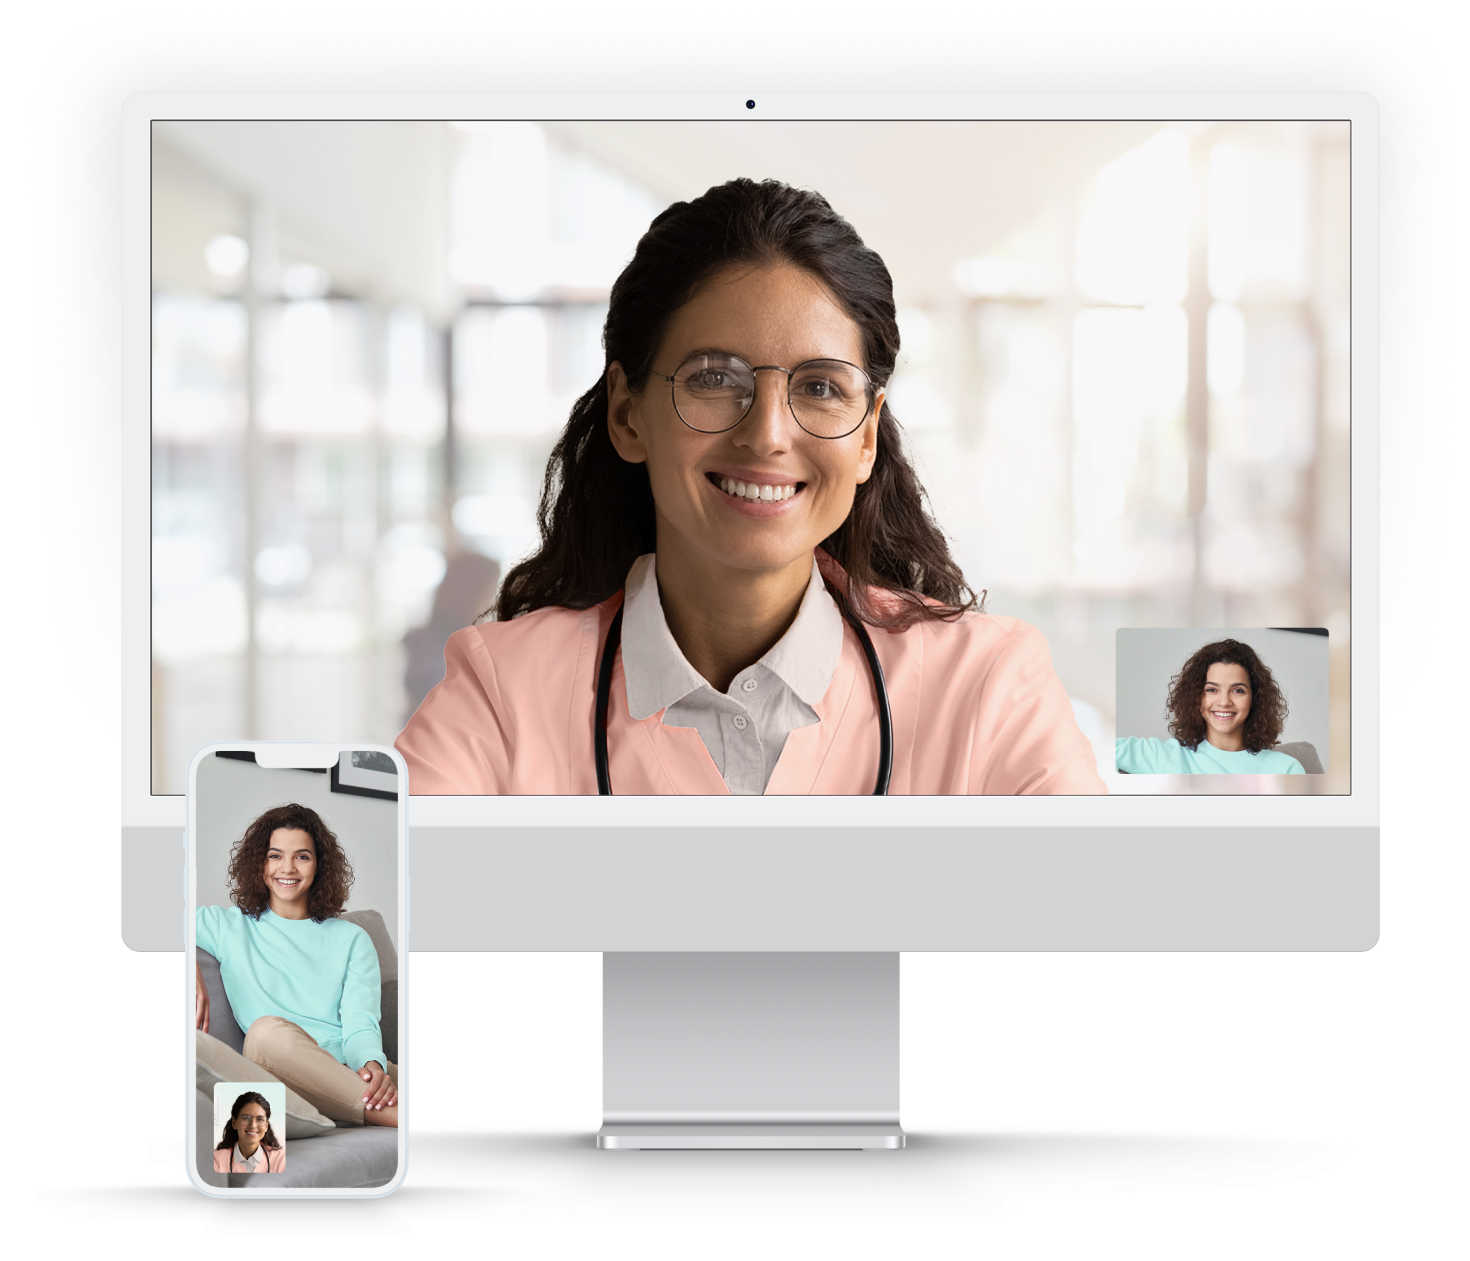 A doctor on a video call with a patient